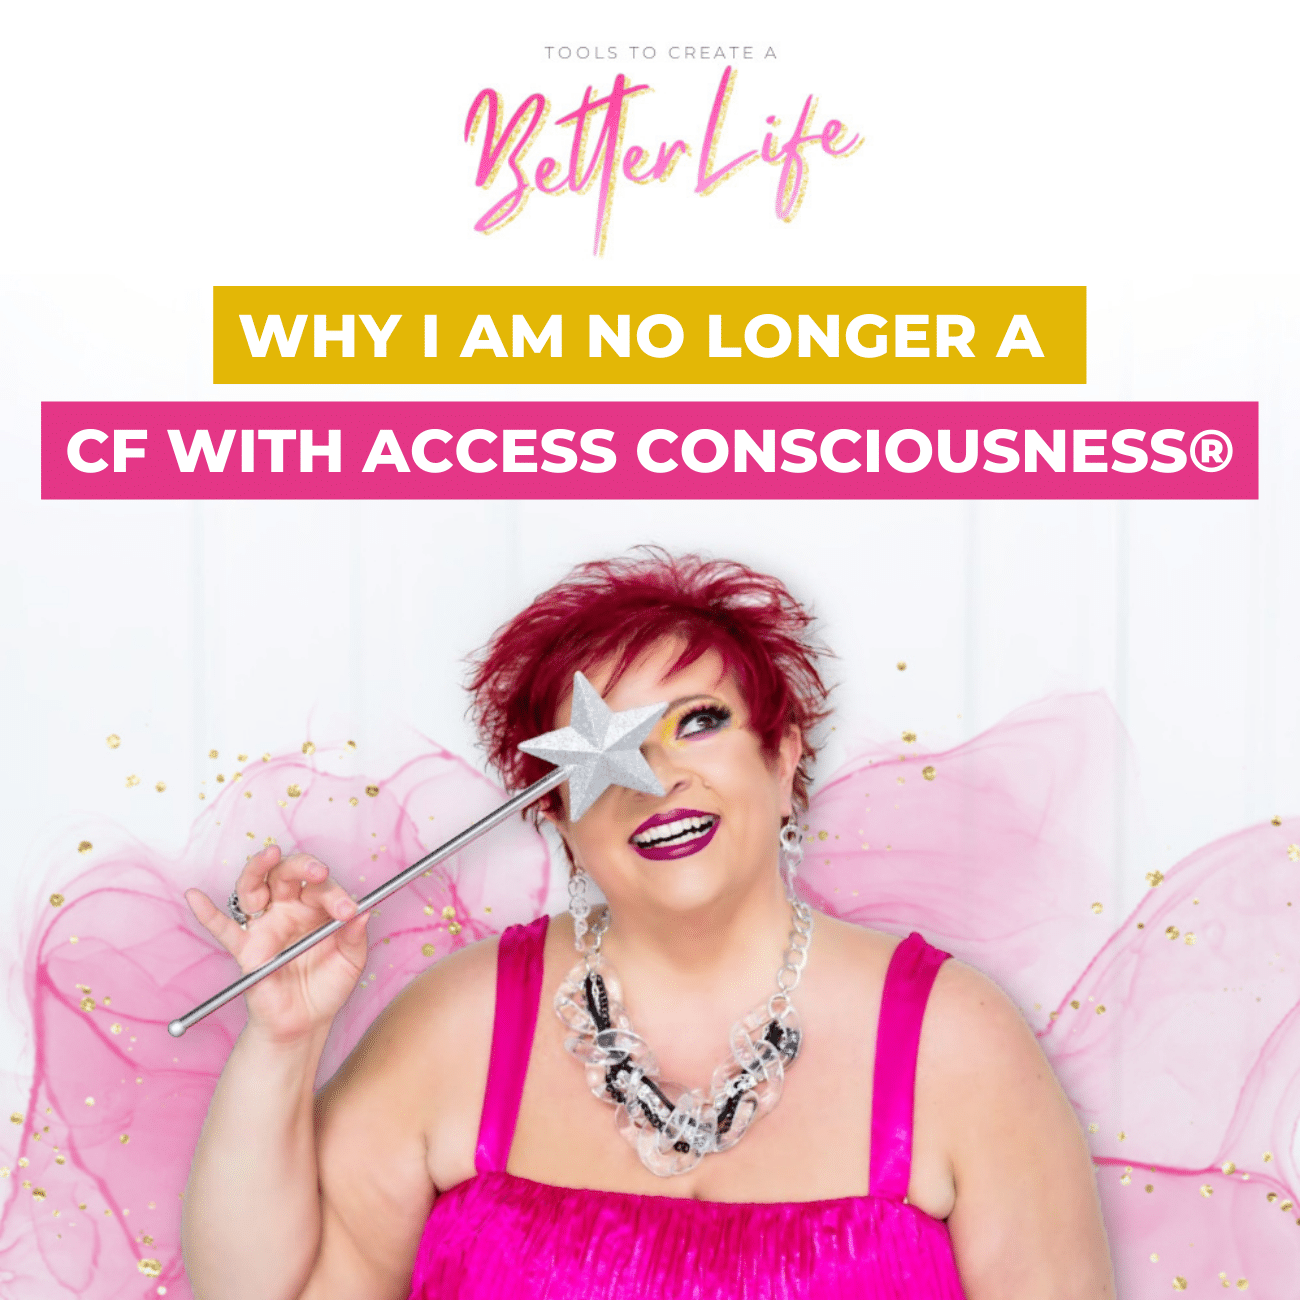 Why I am No Longer a CF with Access Consciousness®